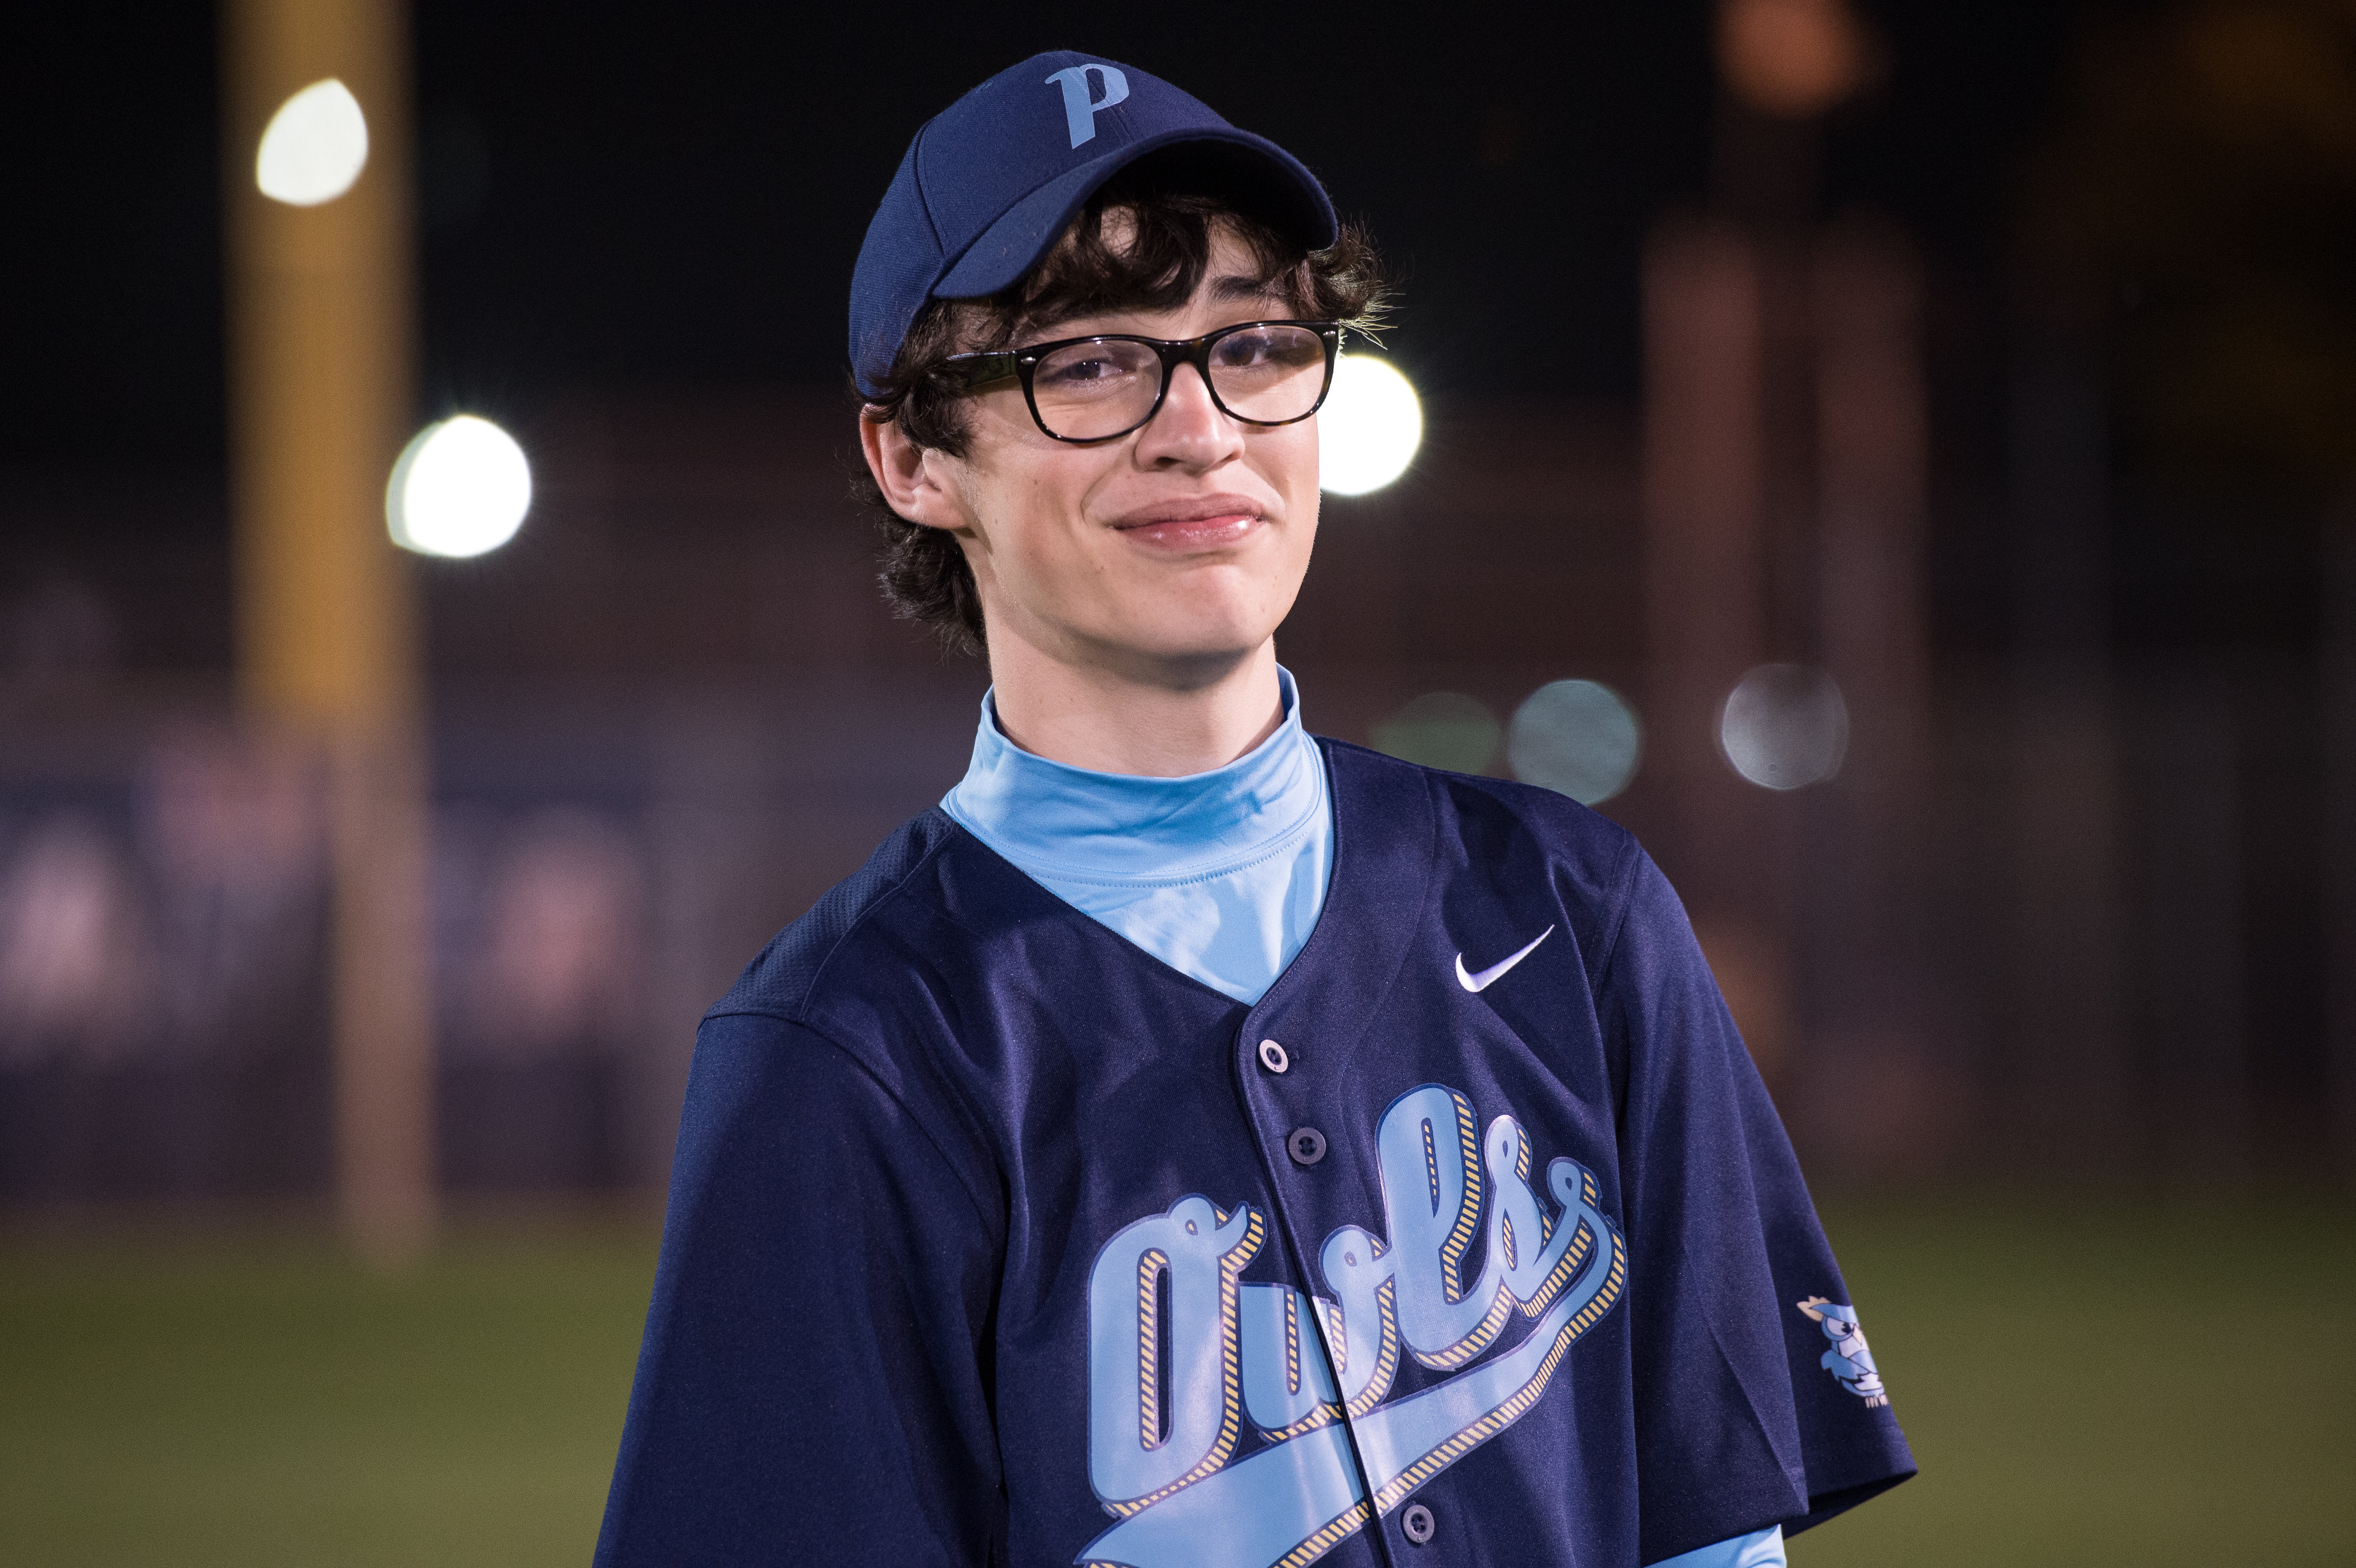 Austin York (Joey Bragg) takes the field in The Outfield.